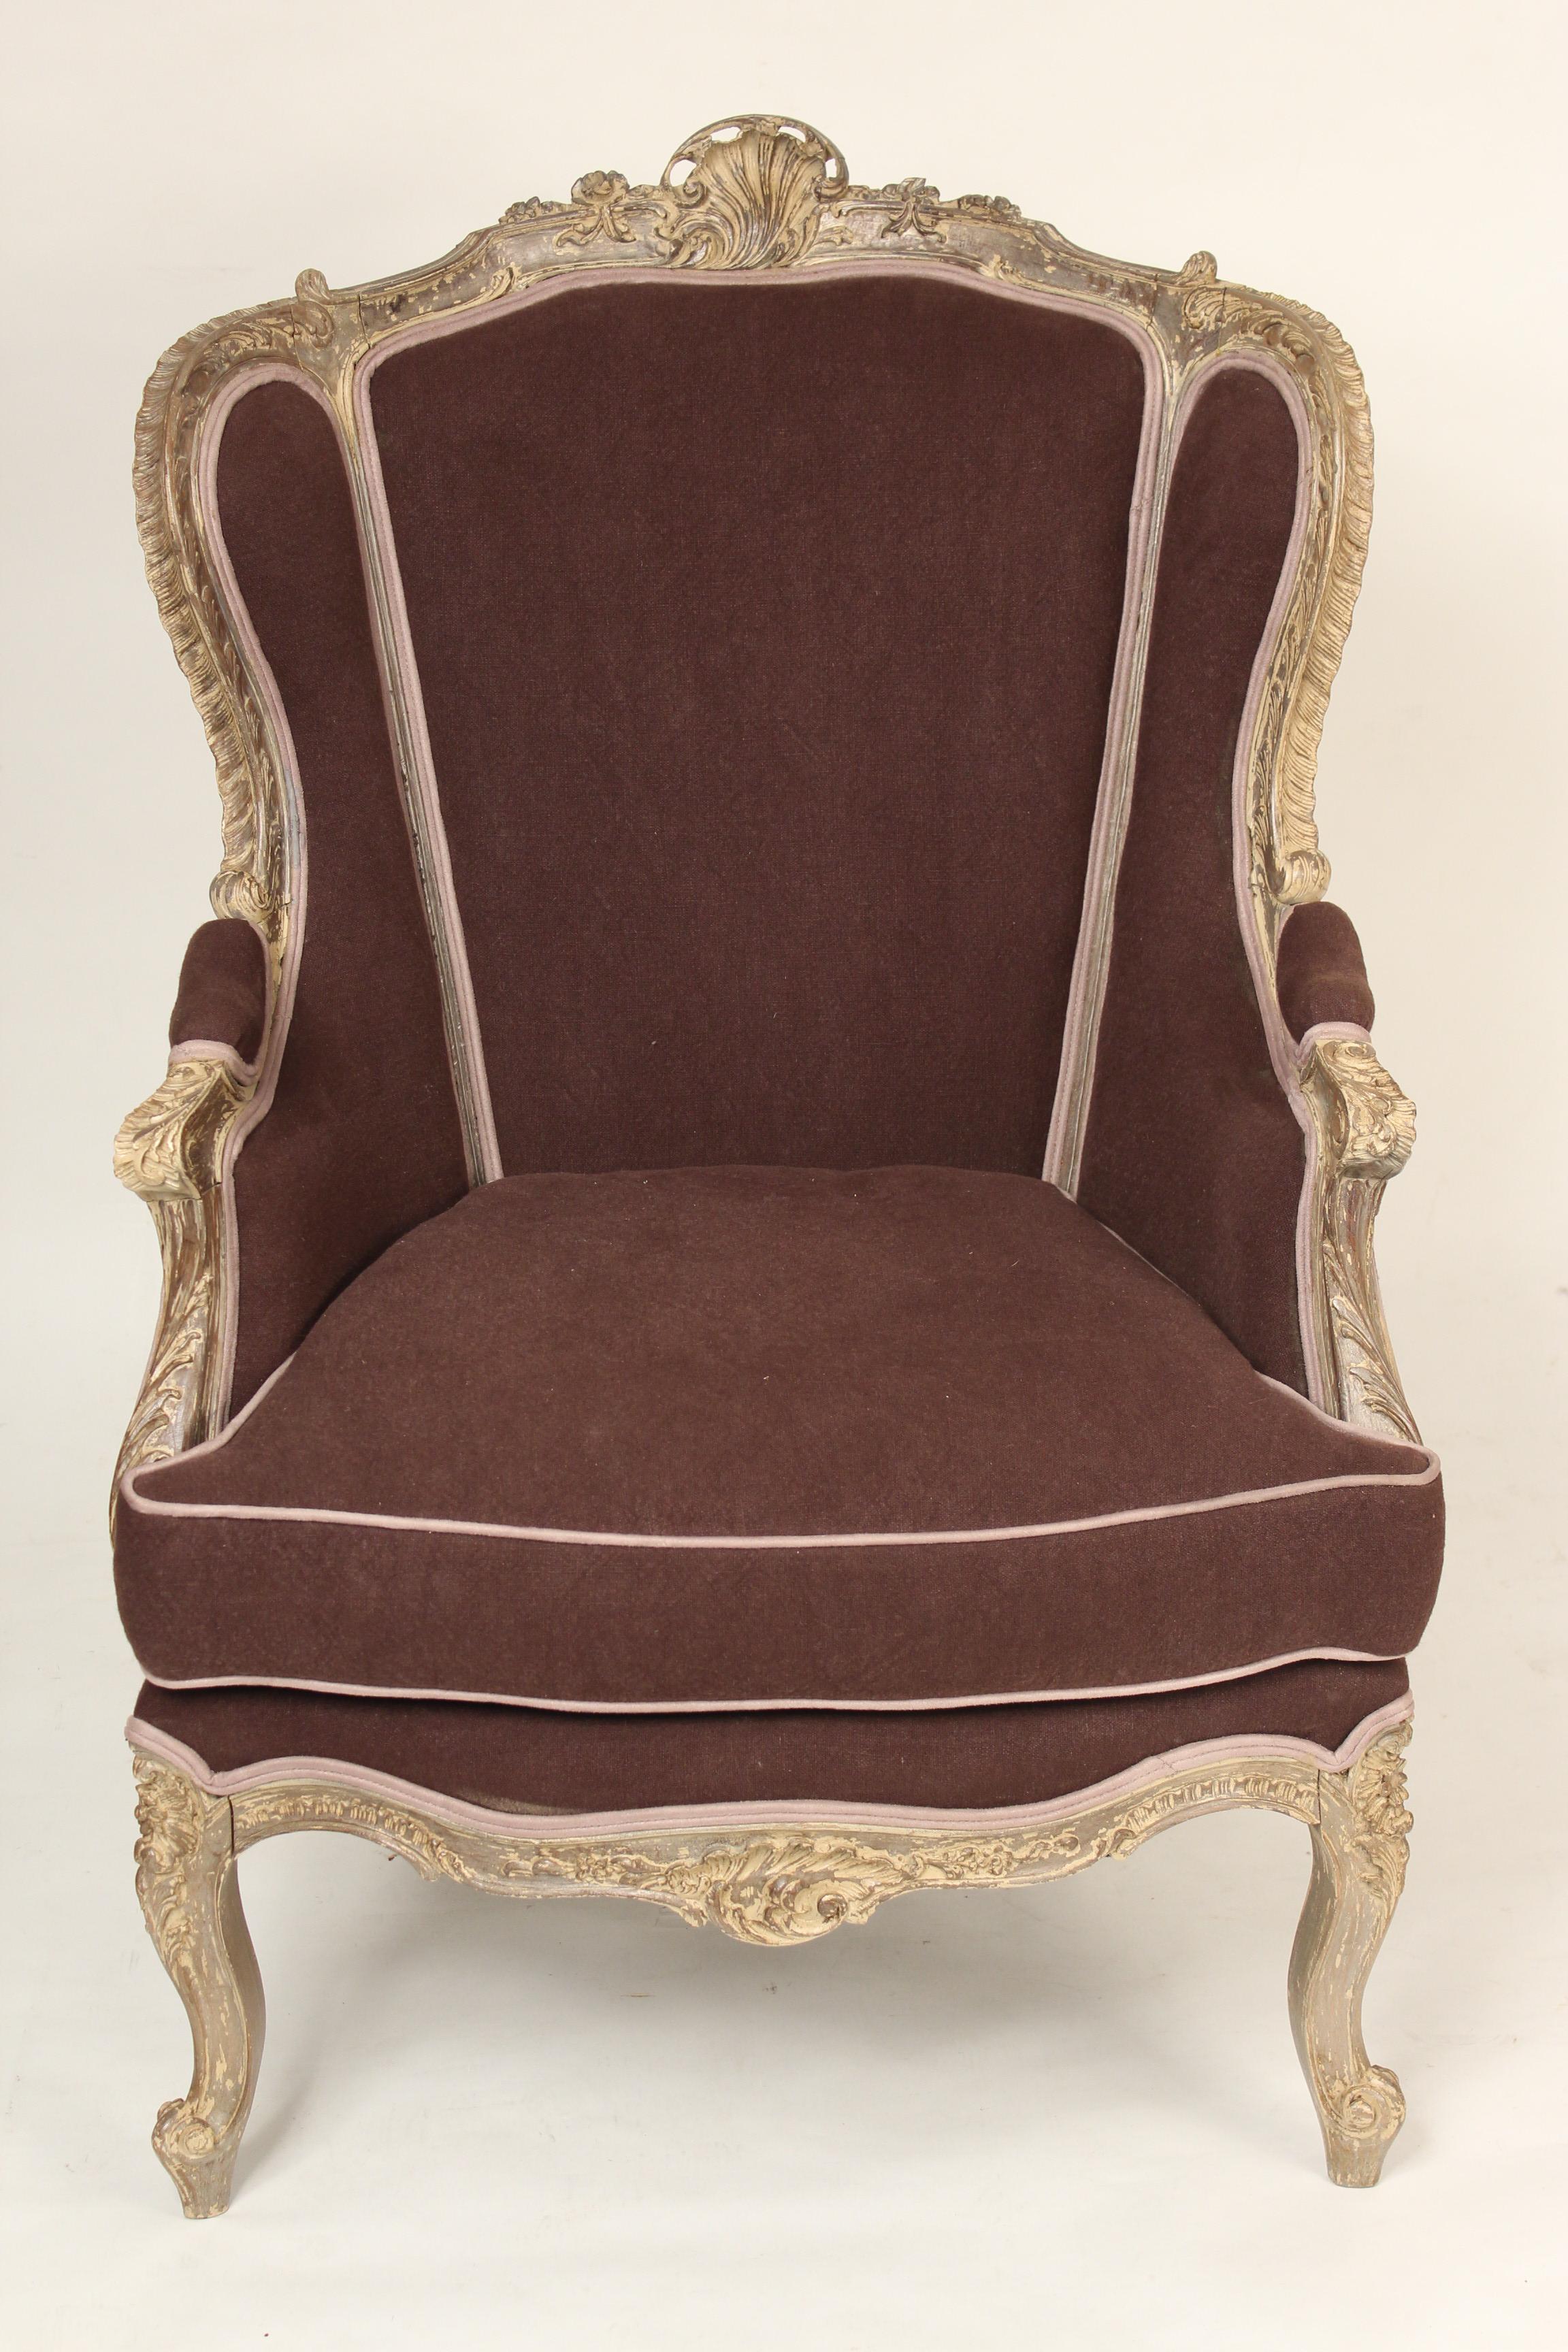 Louis XV style painted bergere, circa 1930. The finish is silver and cream colored paint.